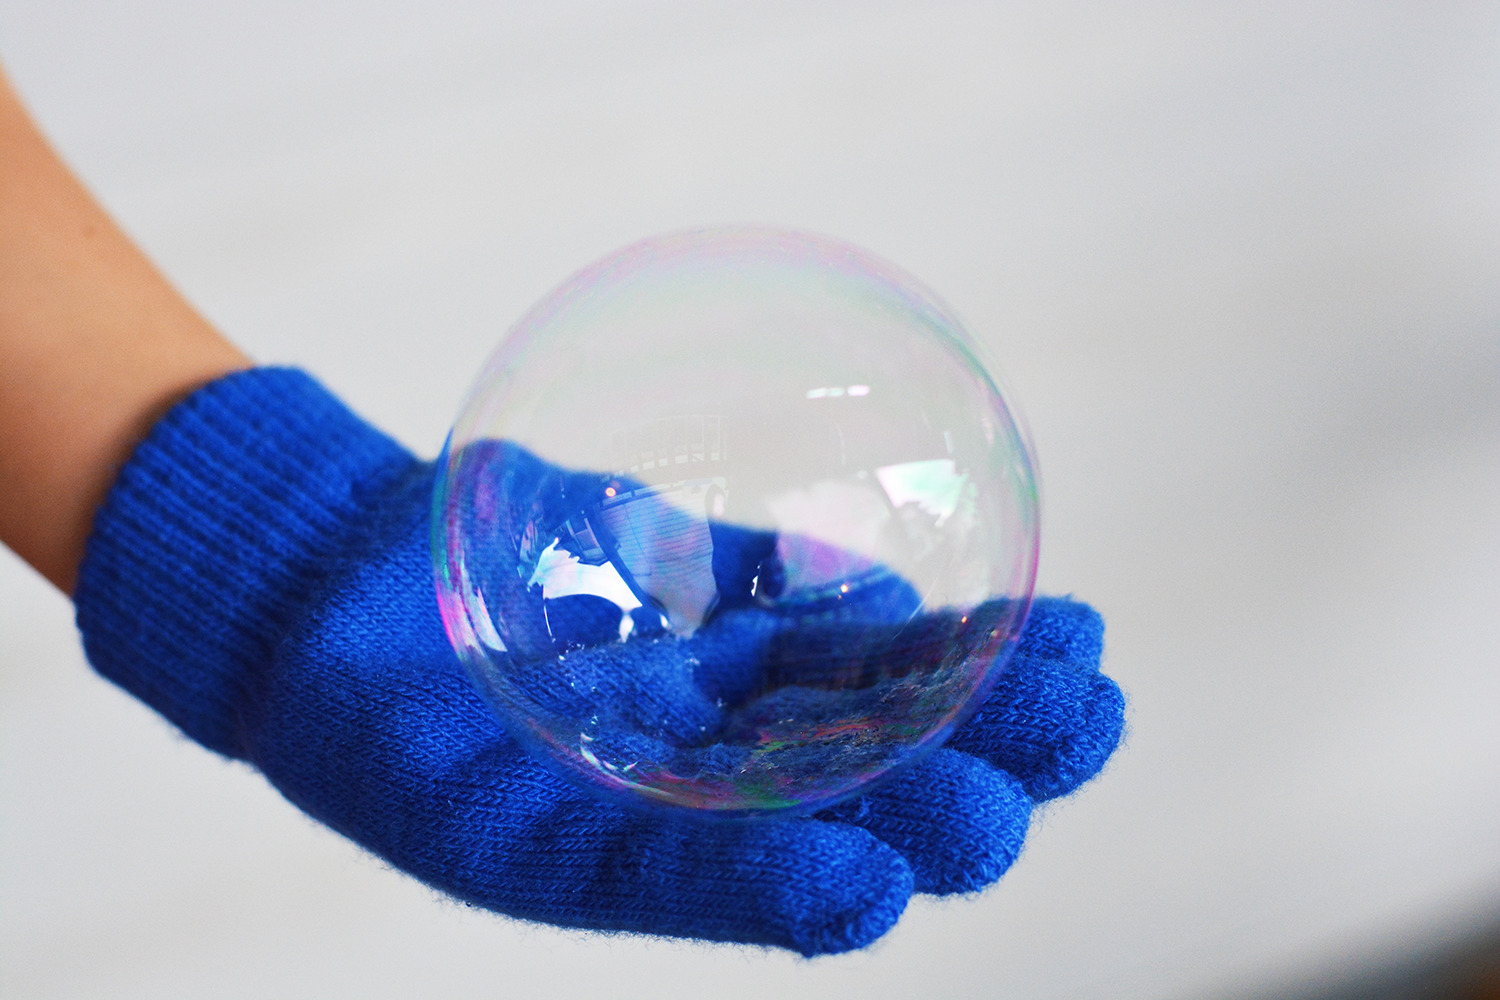 How to make homemade bubbles without glycerin